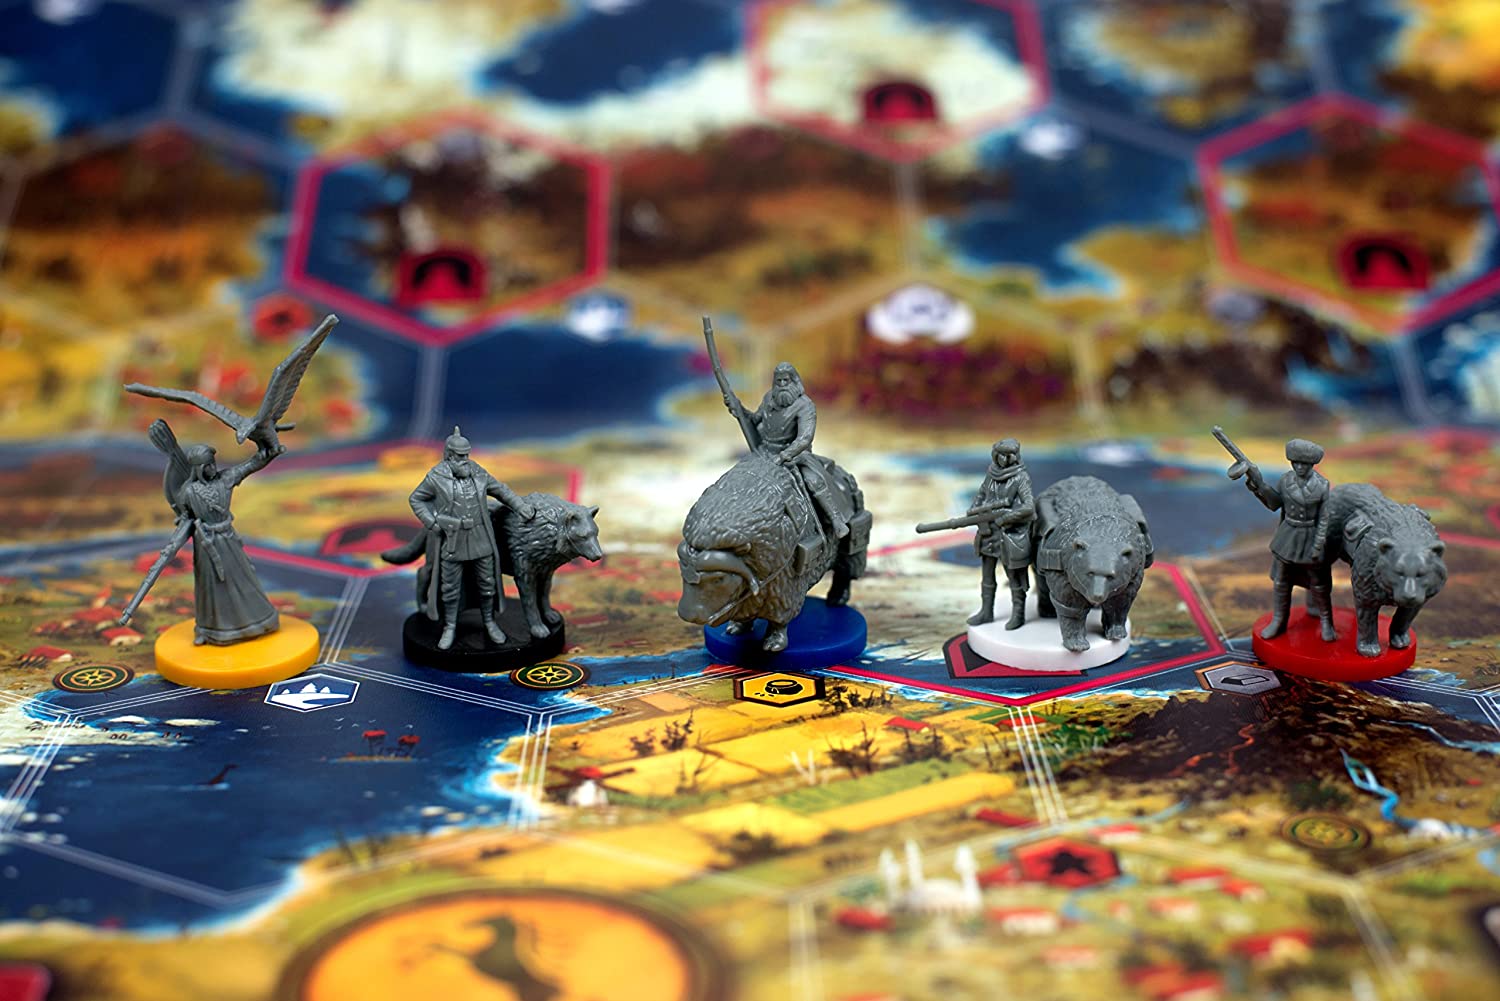 Find out about Scythe